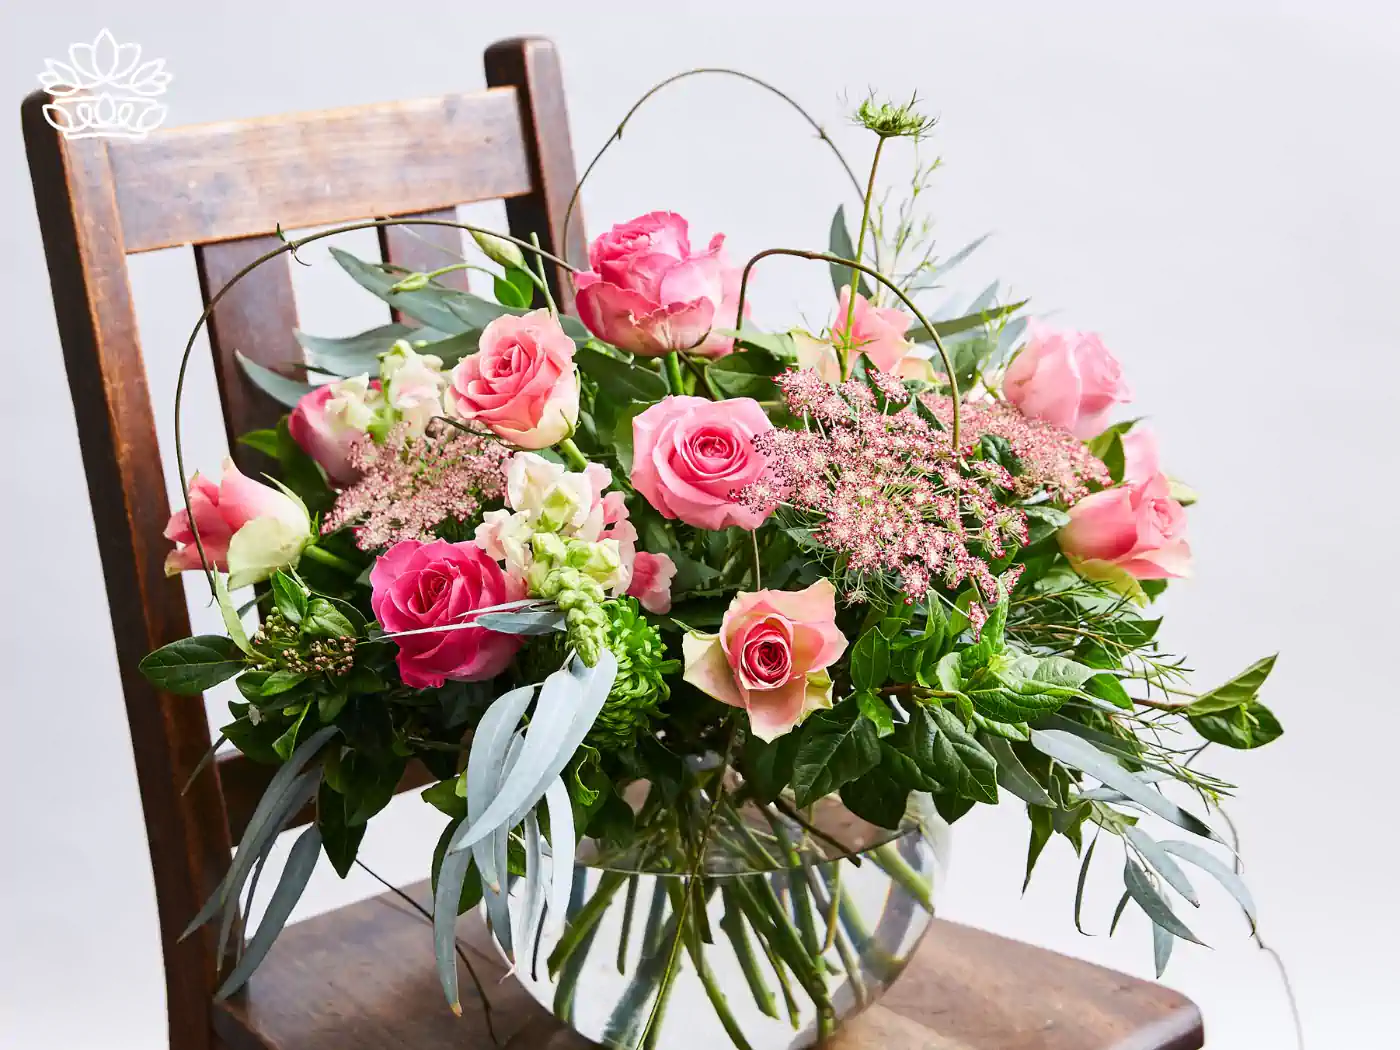 Artistic floral arrangement displayed on an antique wooden chair, featuring pink roses, blush dahlias, cascading green amaranthus, and whimsical curly willow branches. 